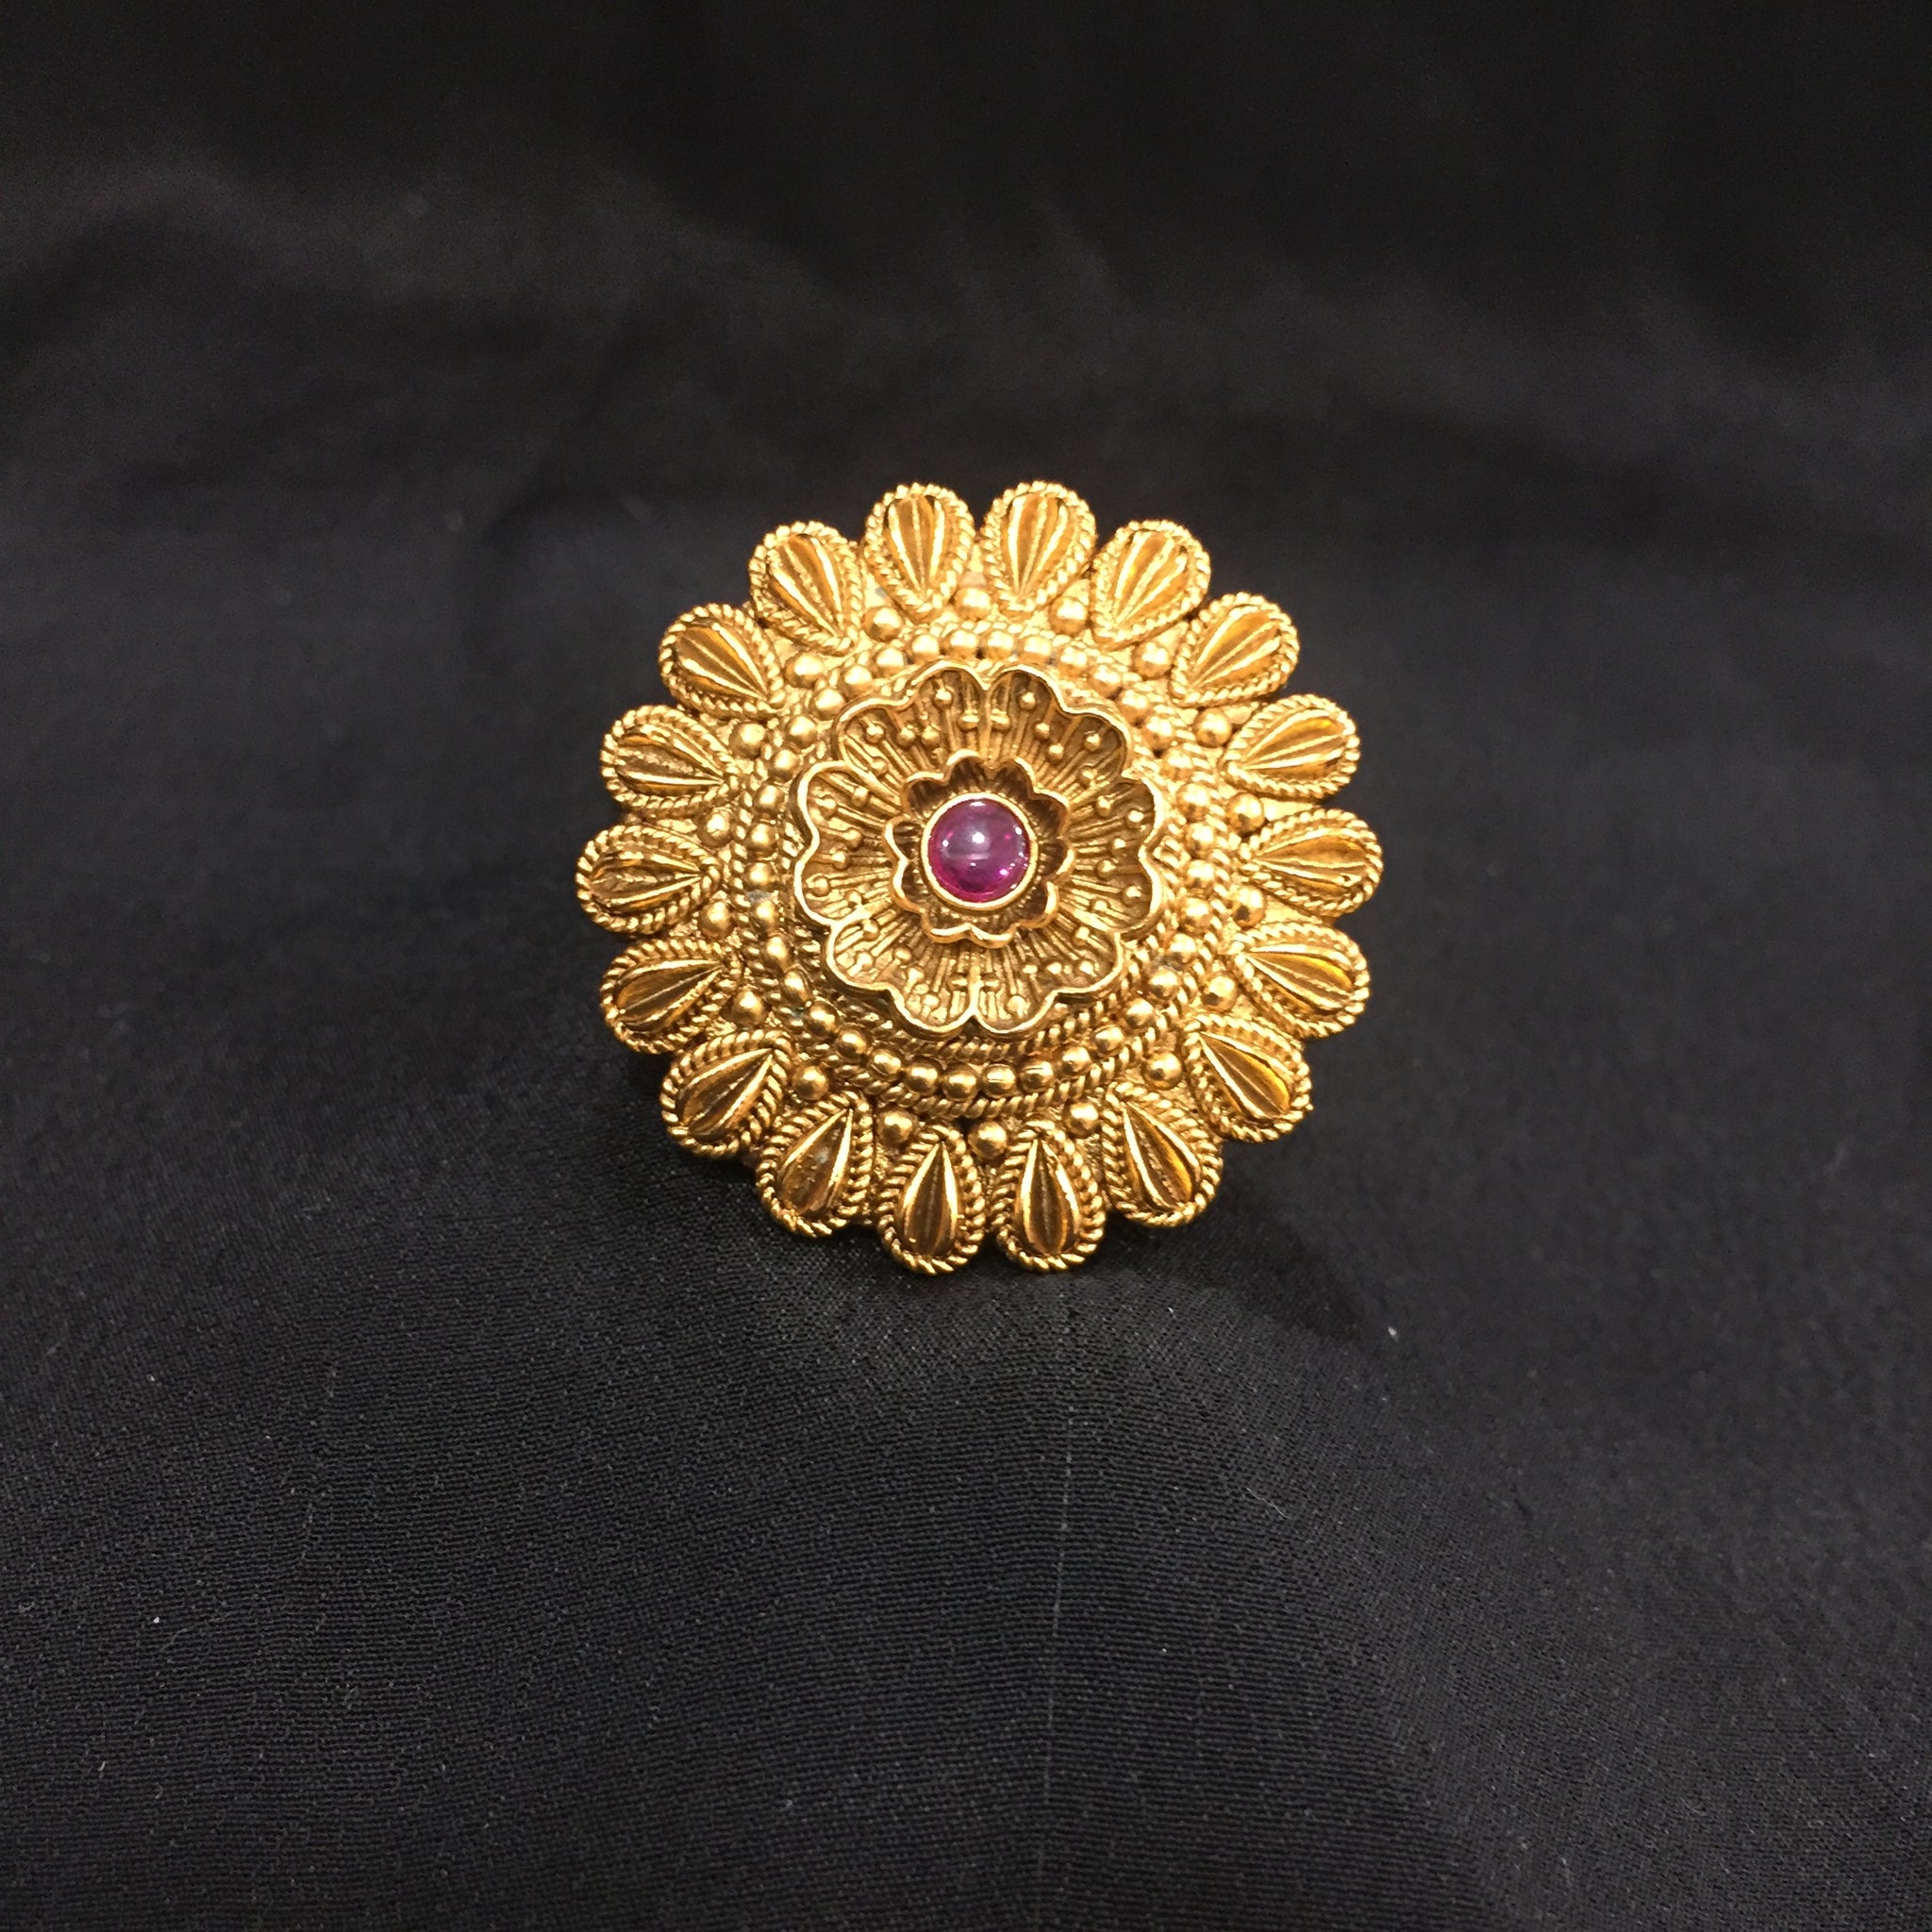 Antique Gold Finish Ring 4033-28 - Dazzles Jewellery